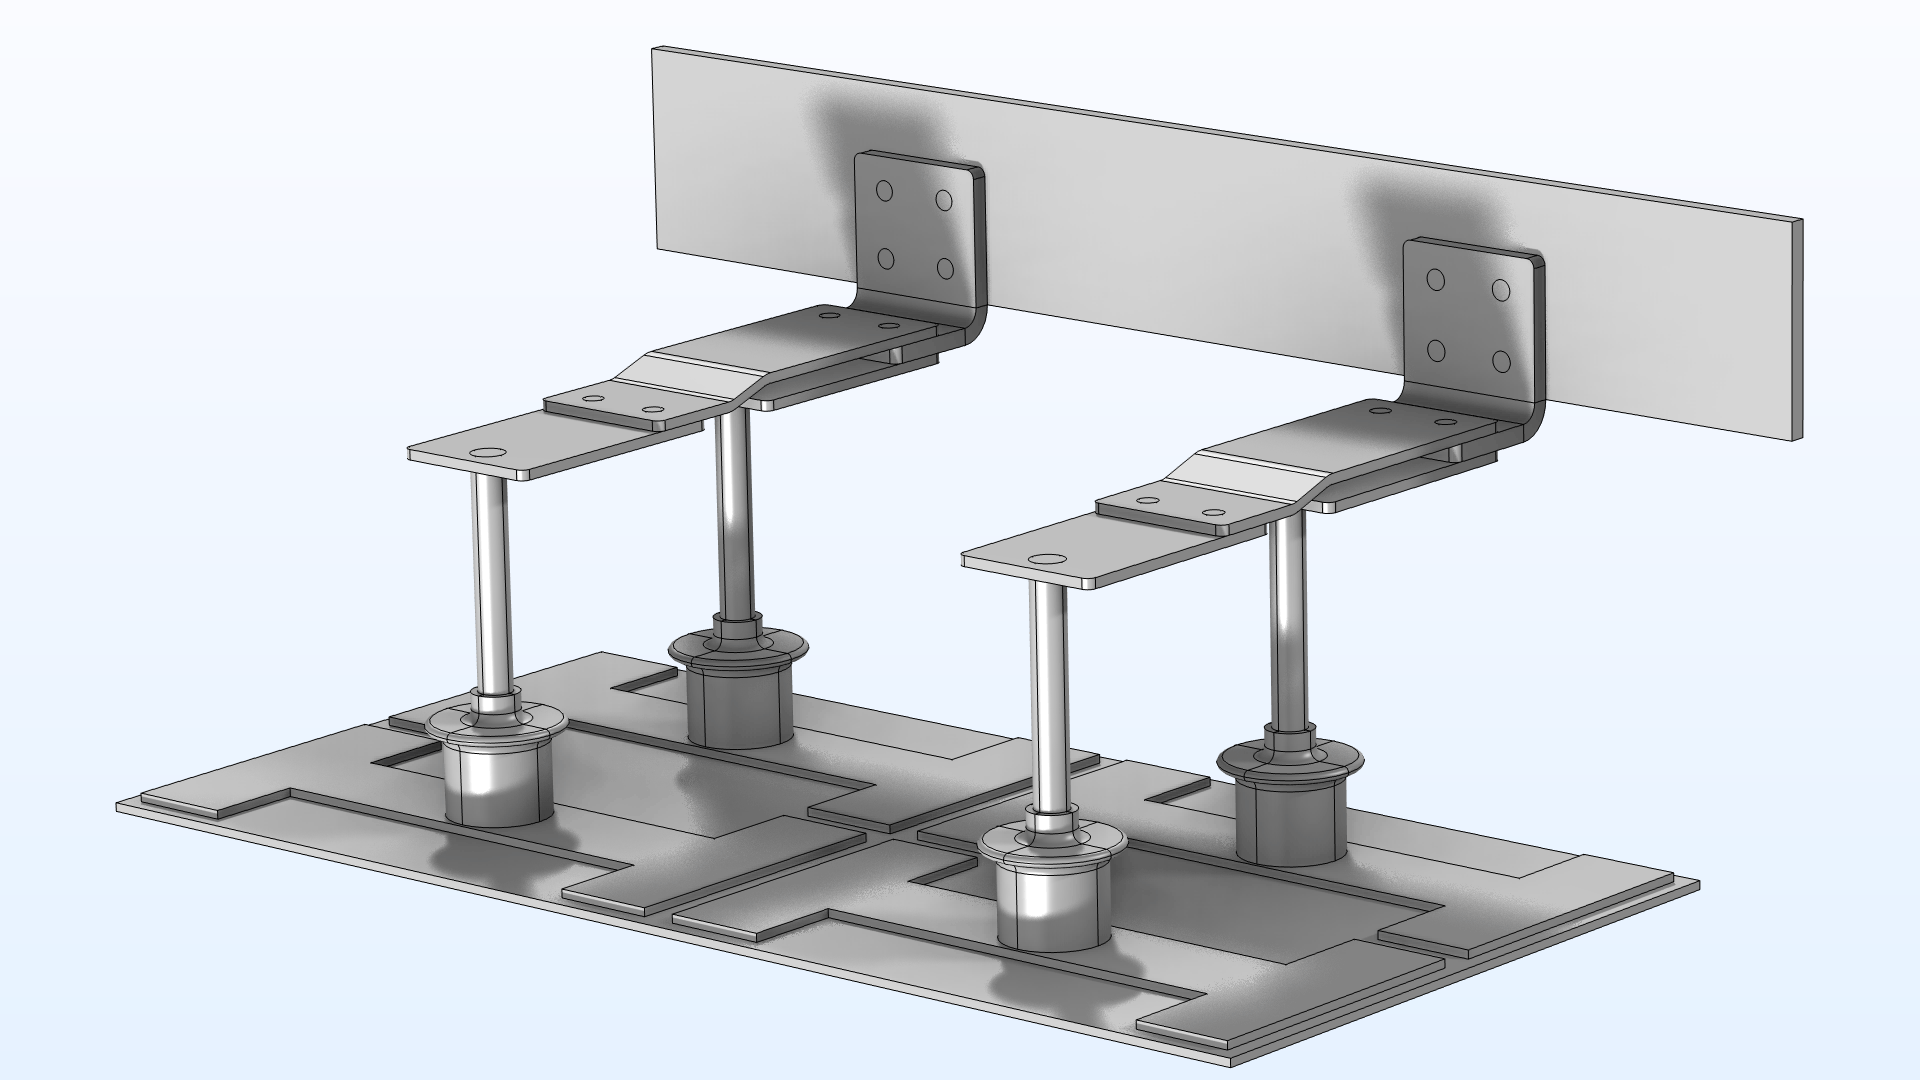 The busbar model from the Busbar Assembly Geometry Tutorial Series, organized by geometry parts.